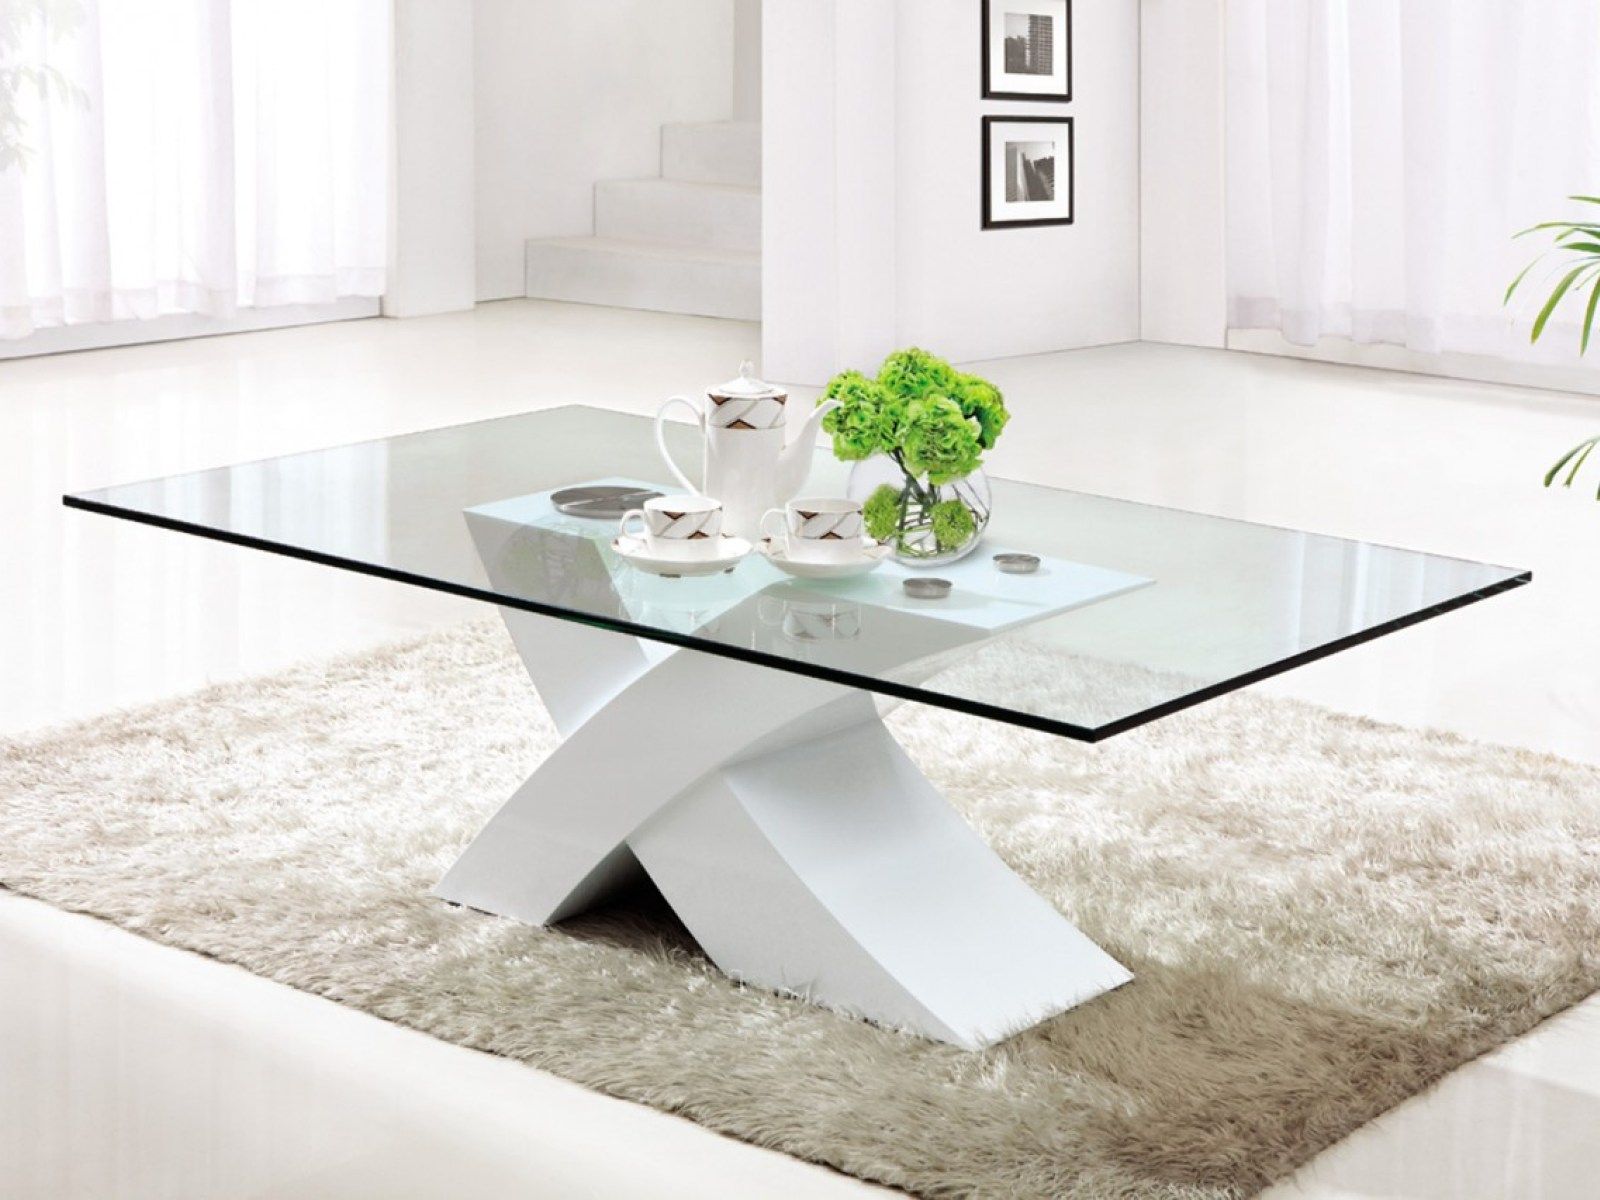 Clear Acrylic Coffee Table Ikea – Listerby Brown Coffee Inside Popular Clear Acrylic Coffee Tables (View 5 of 20)